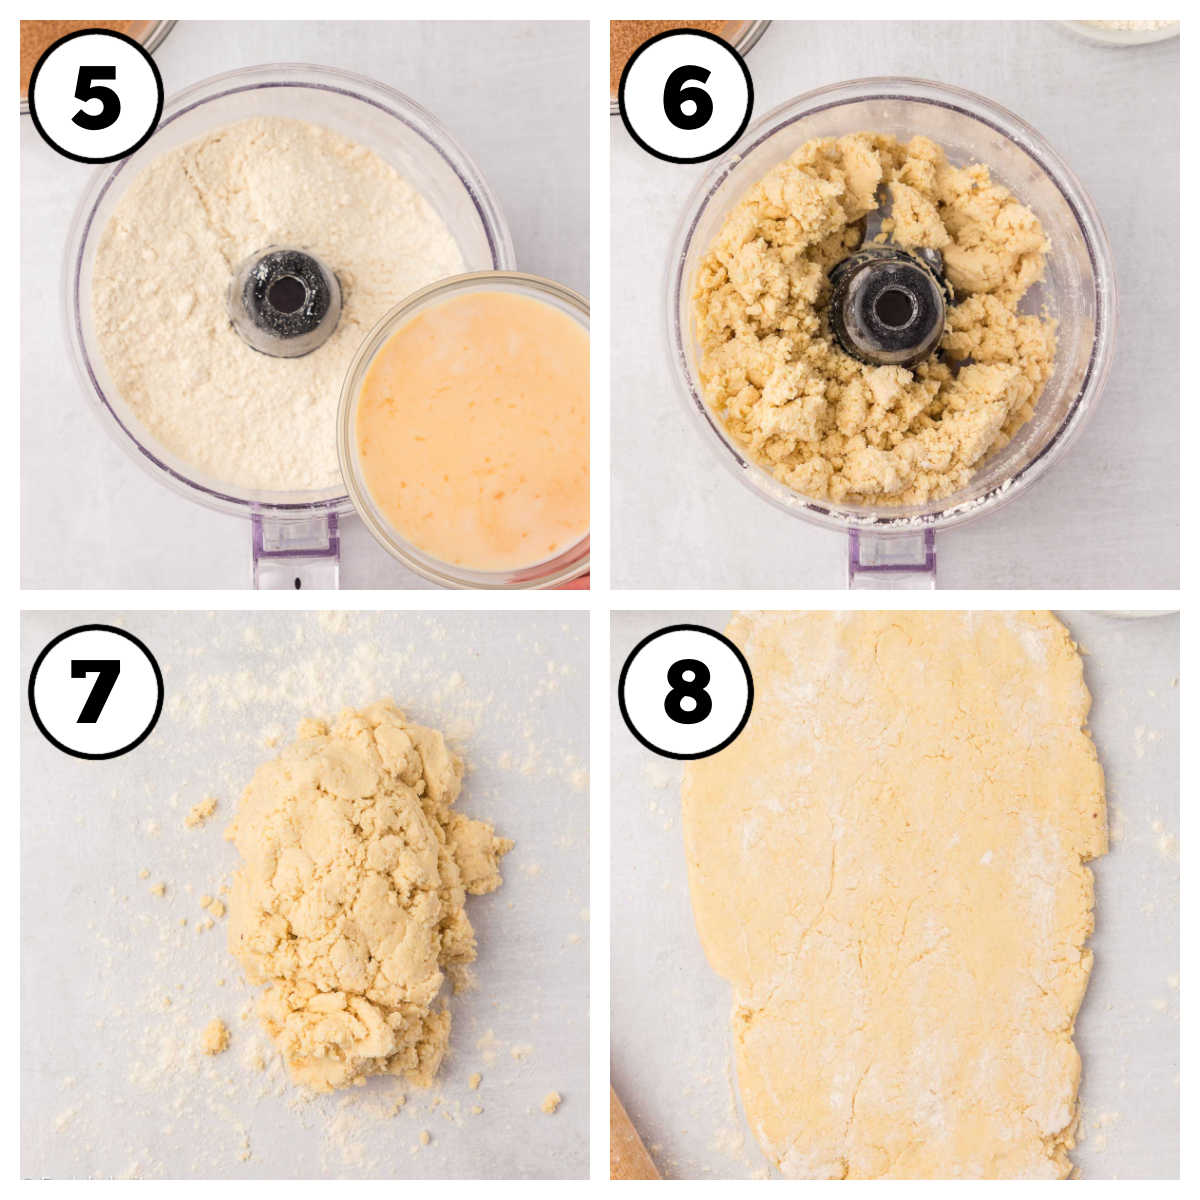 Step by step of how to make cinnamon biscuits.